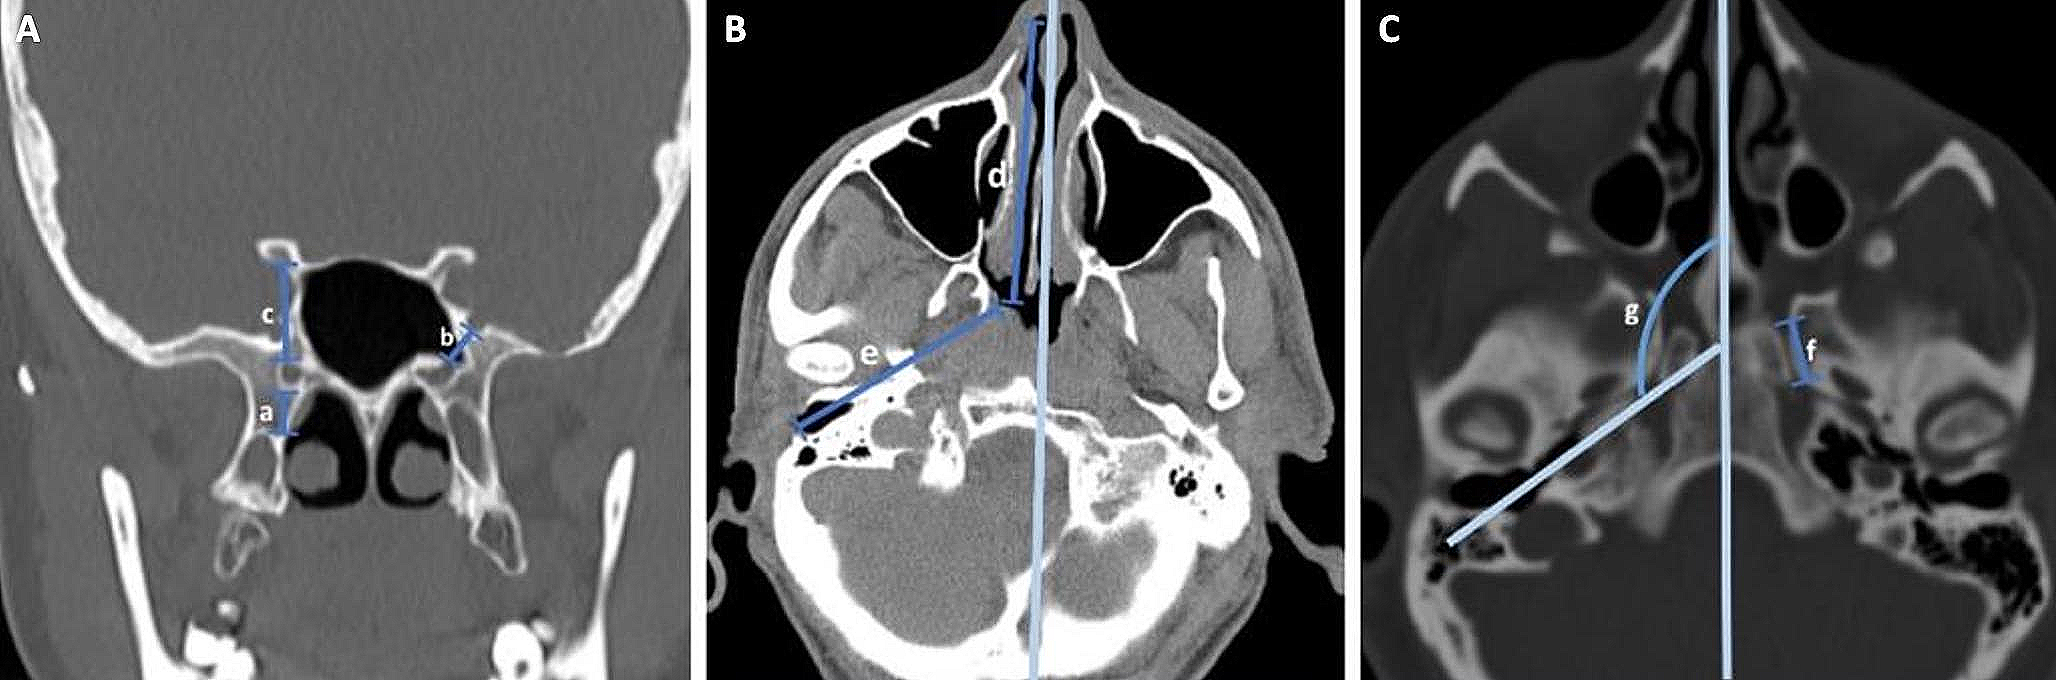 Endoscopic trans-eustachian tube approach: identifying the precise landmarks, a novel radiological and anatomical evaluation